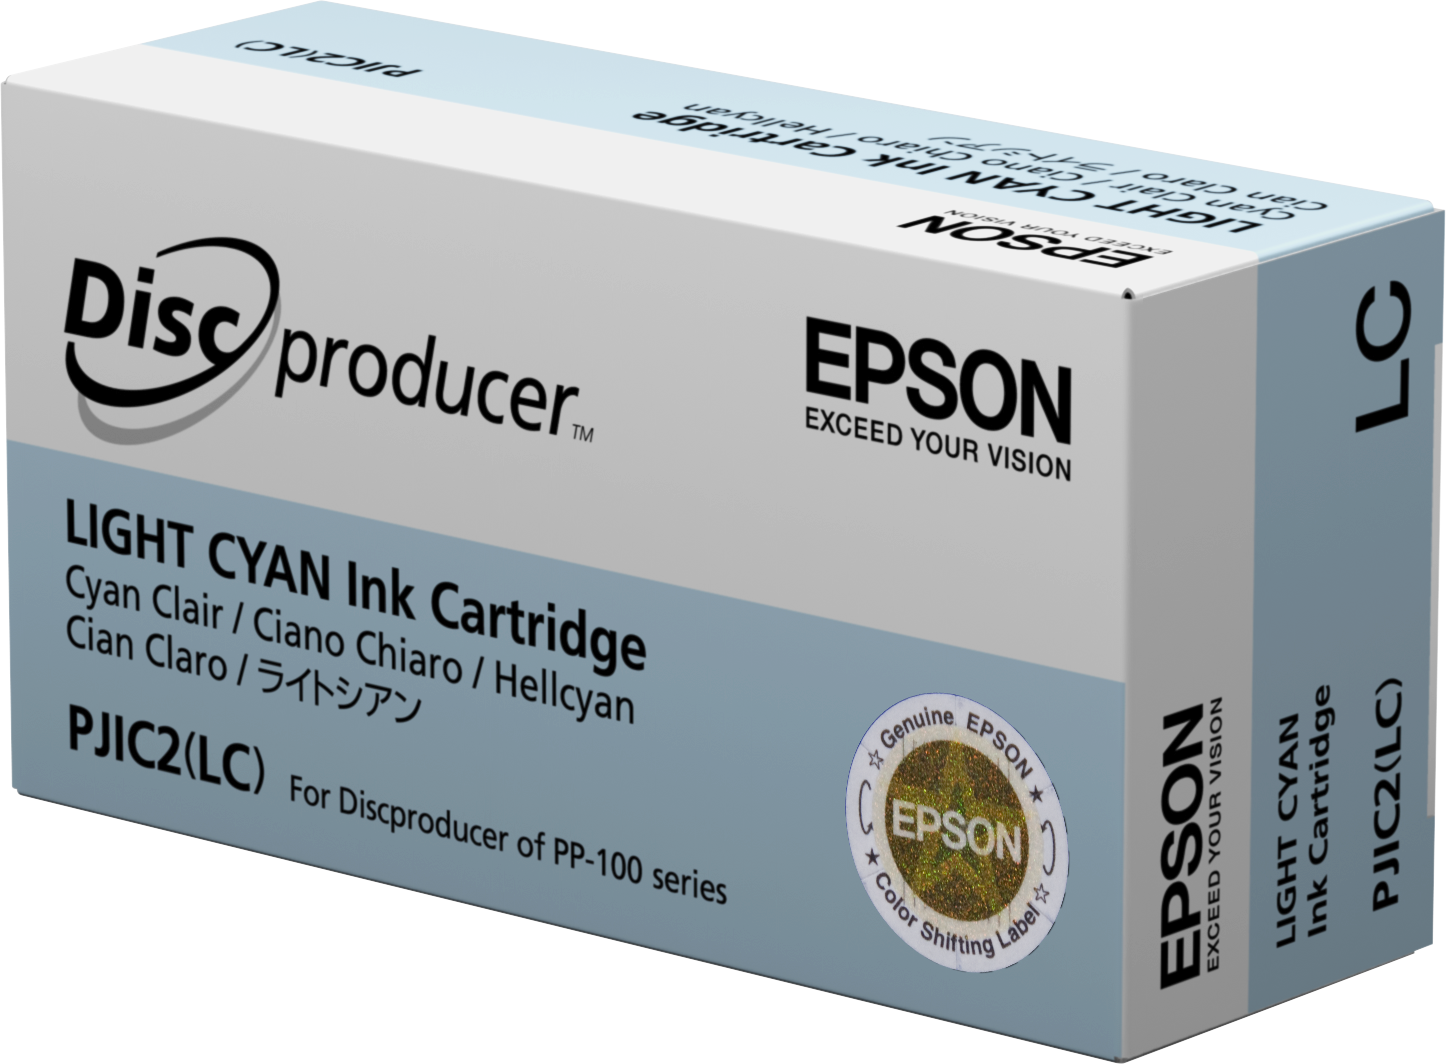 Epson Discproducer™ PP-50 | Discproducer | Products | Epson United 